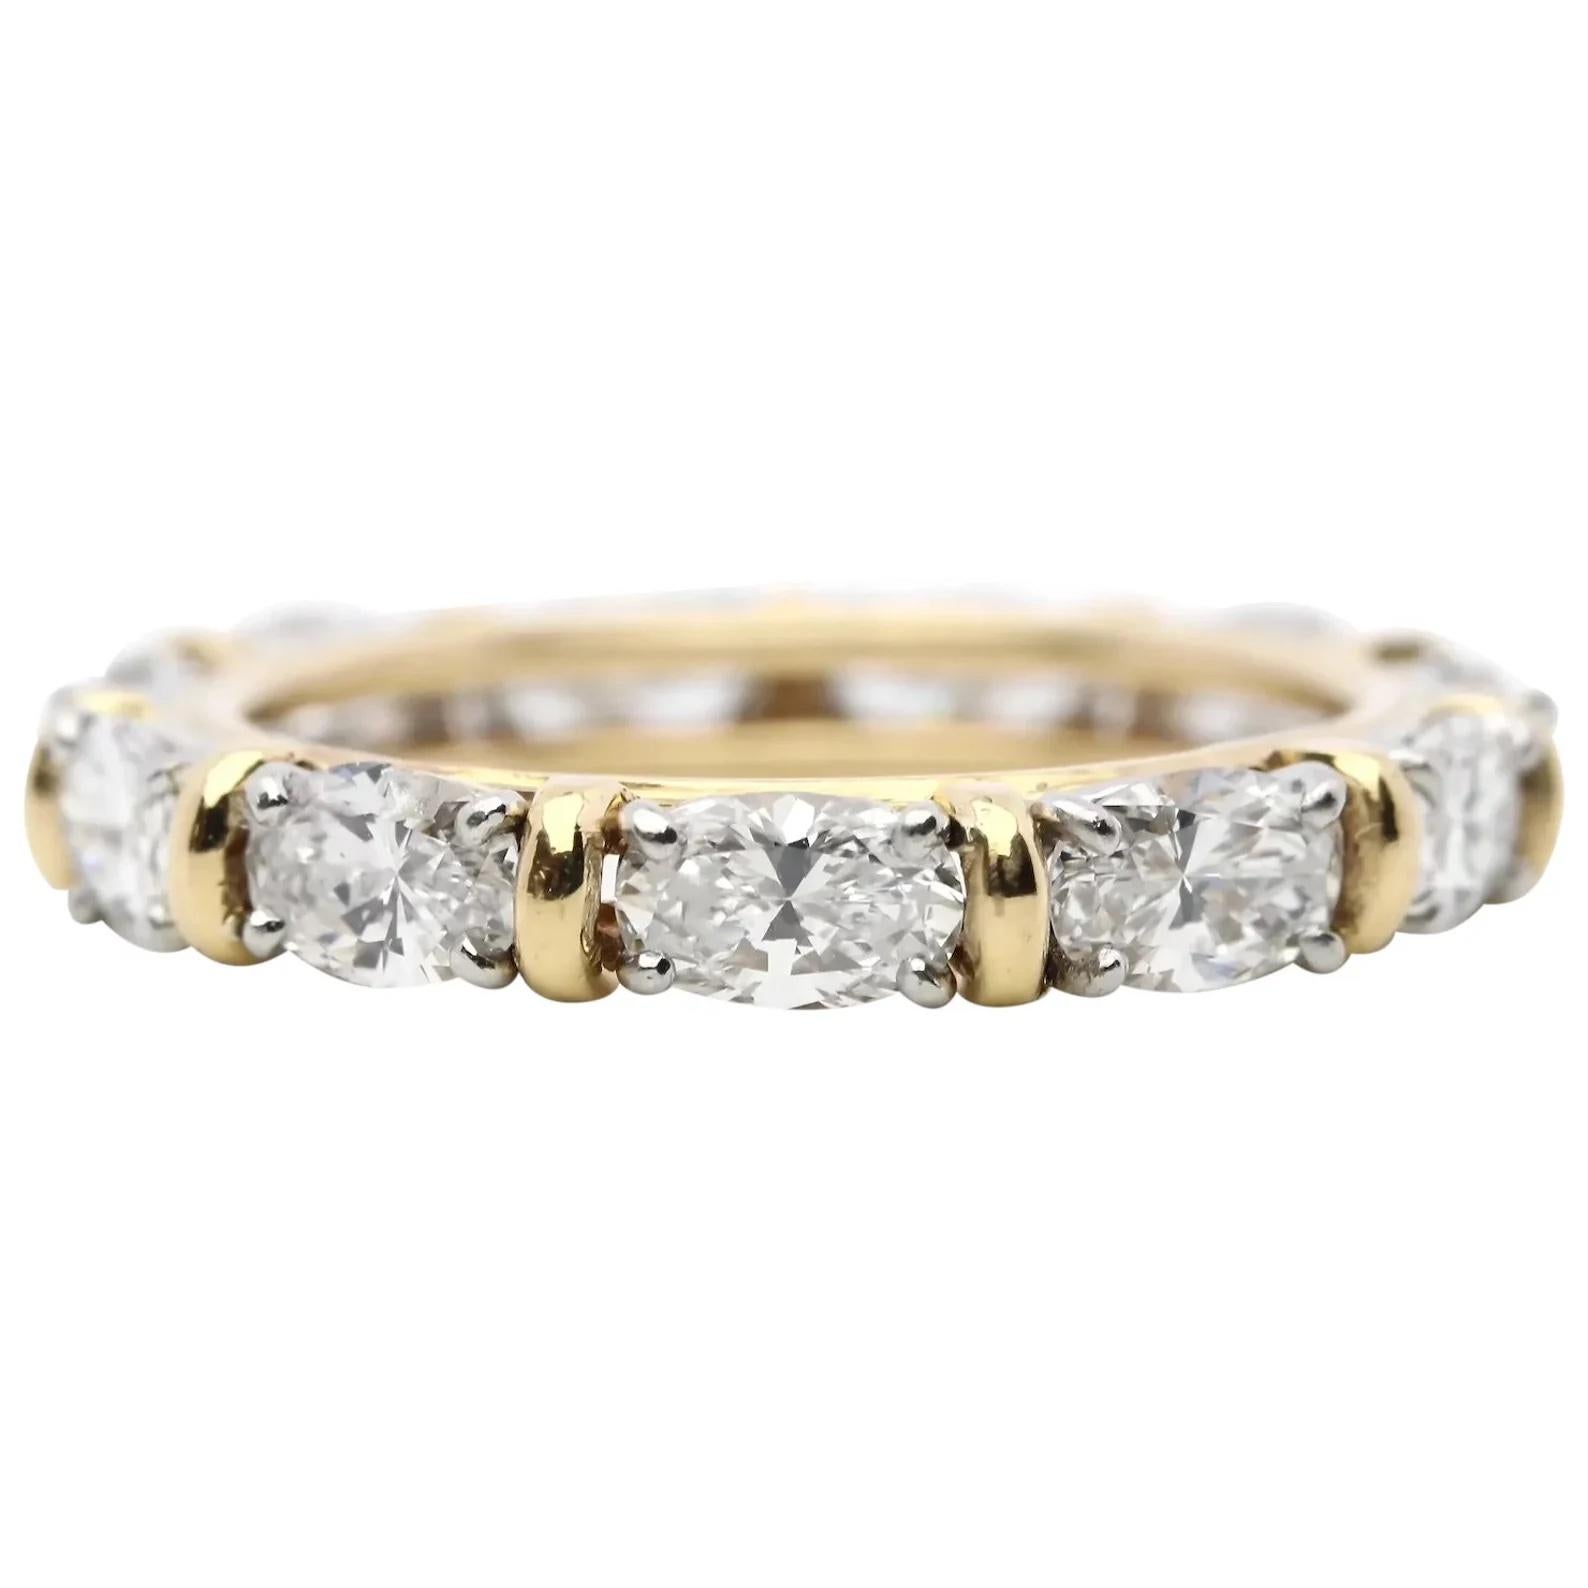 Sparkling 3.30ct Oval Cut Diamond Eternity Band in 18K Gold, Platinum For Sale